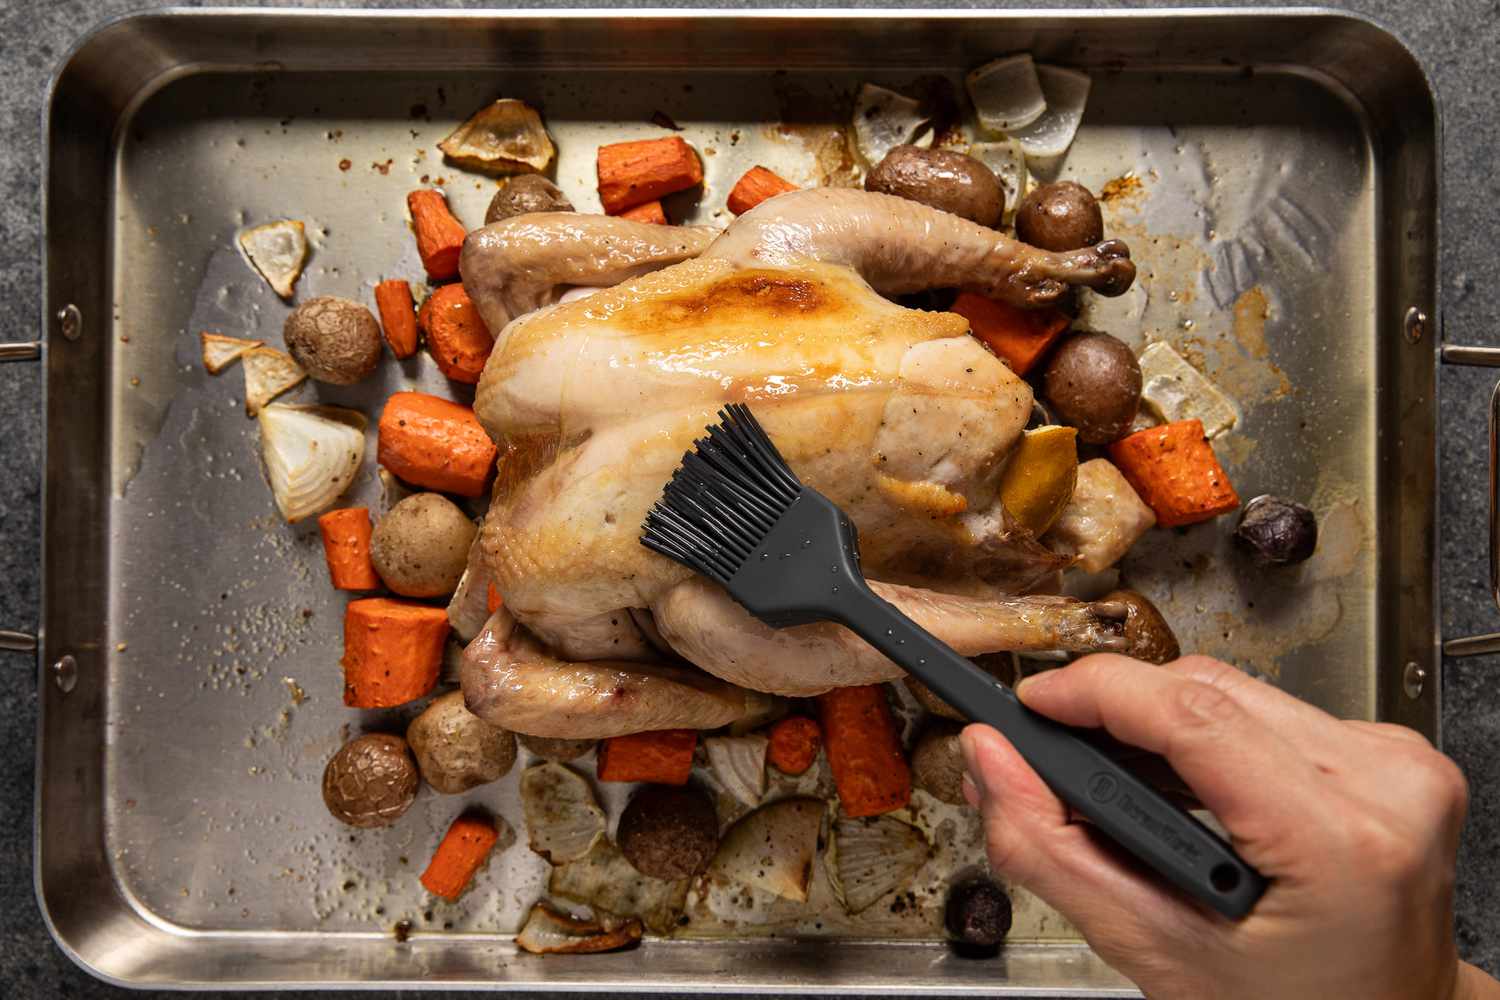 Silicone basting brush used to baste roasted chicken with pan juices